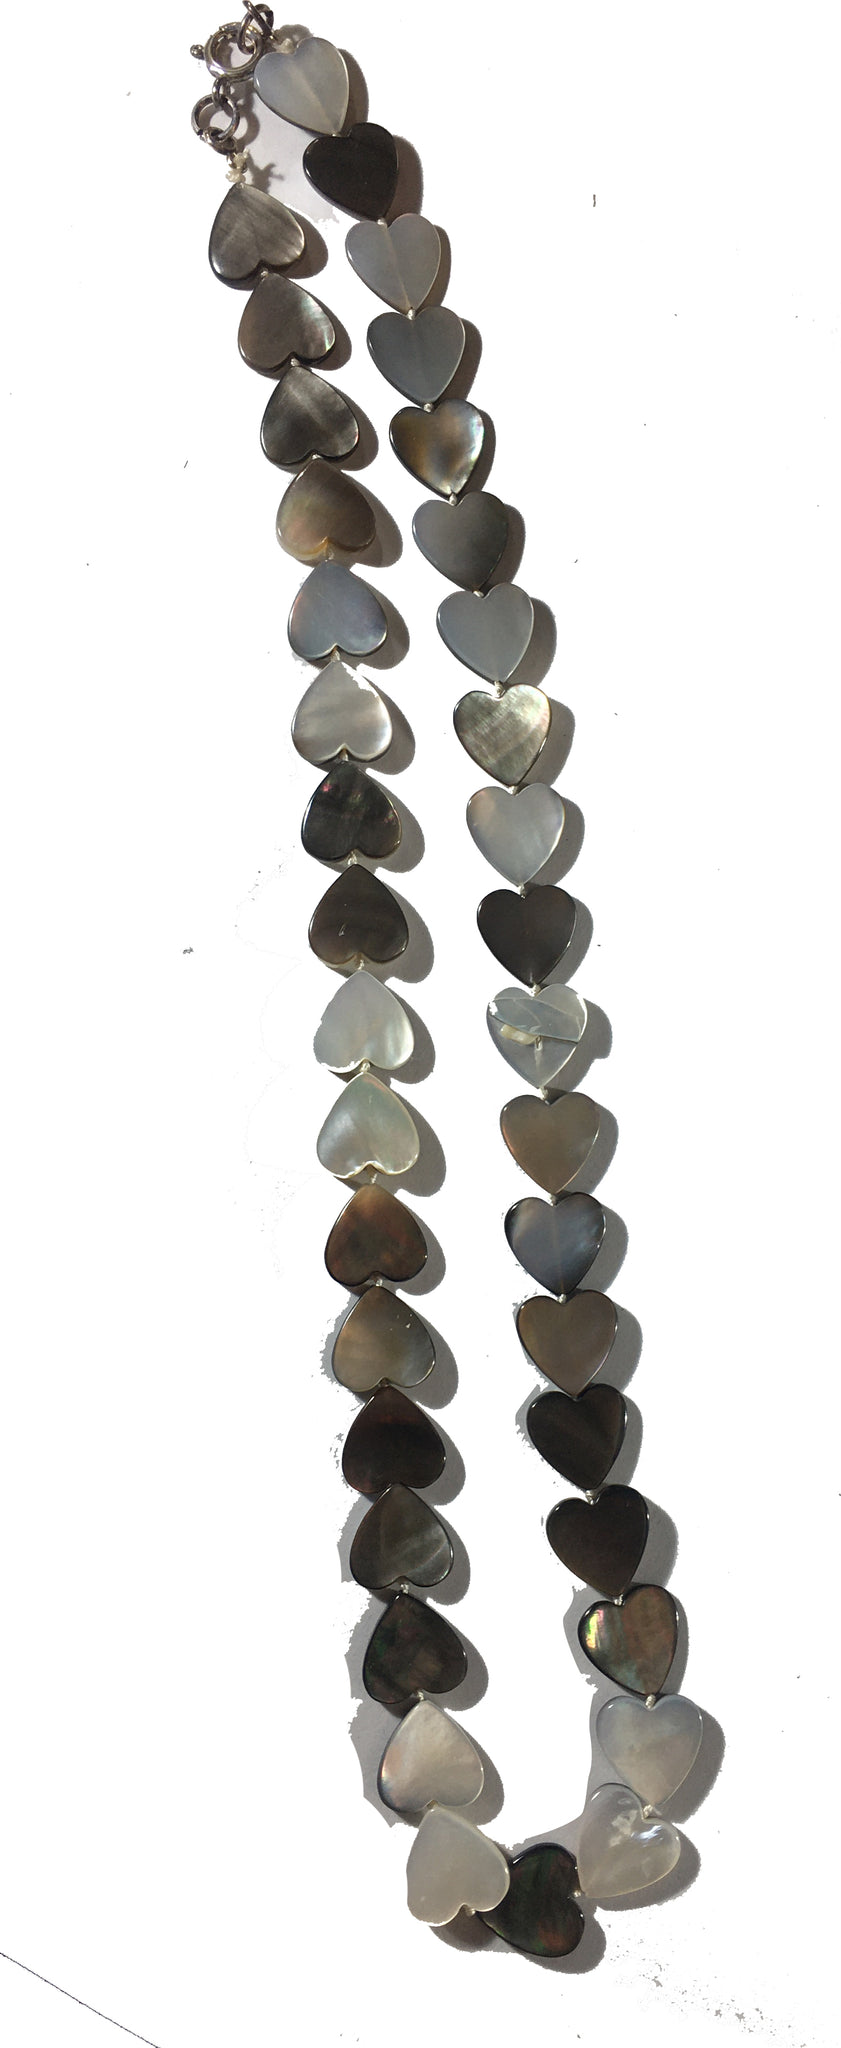 Mother of Pearl Heart Bead Necklace - 18inch long - 10x10x2mm Beads